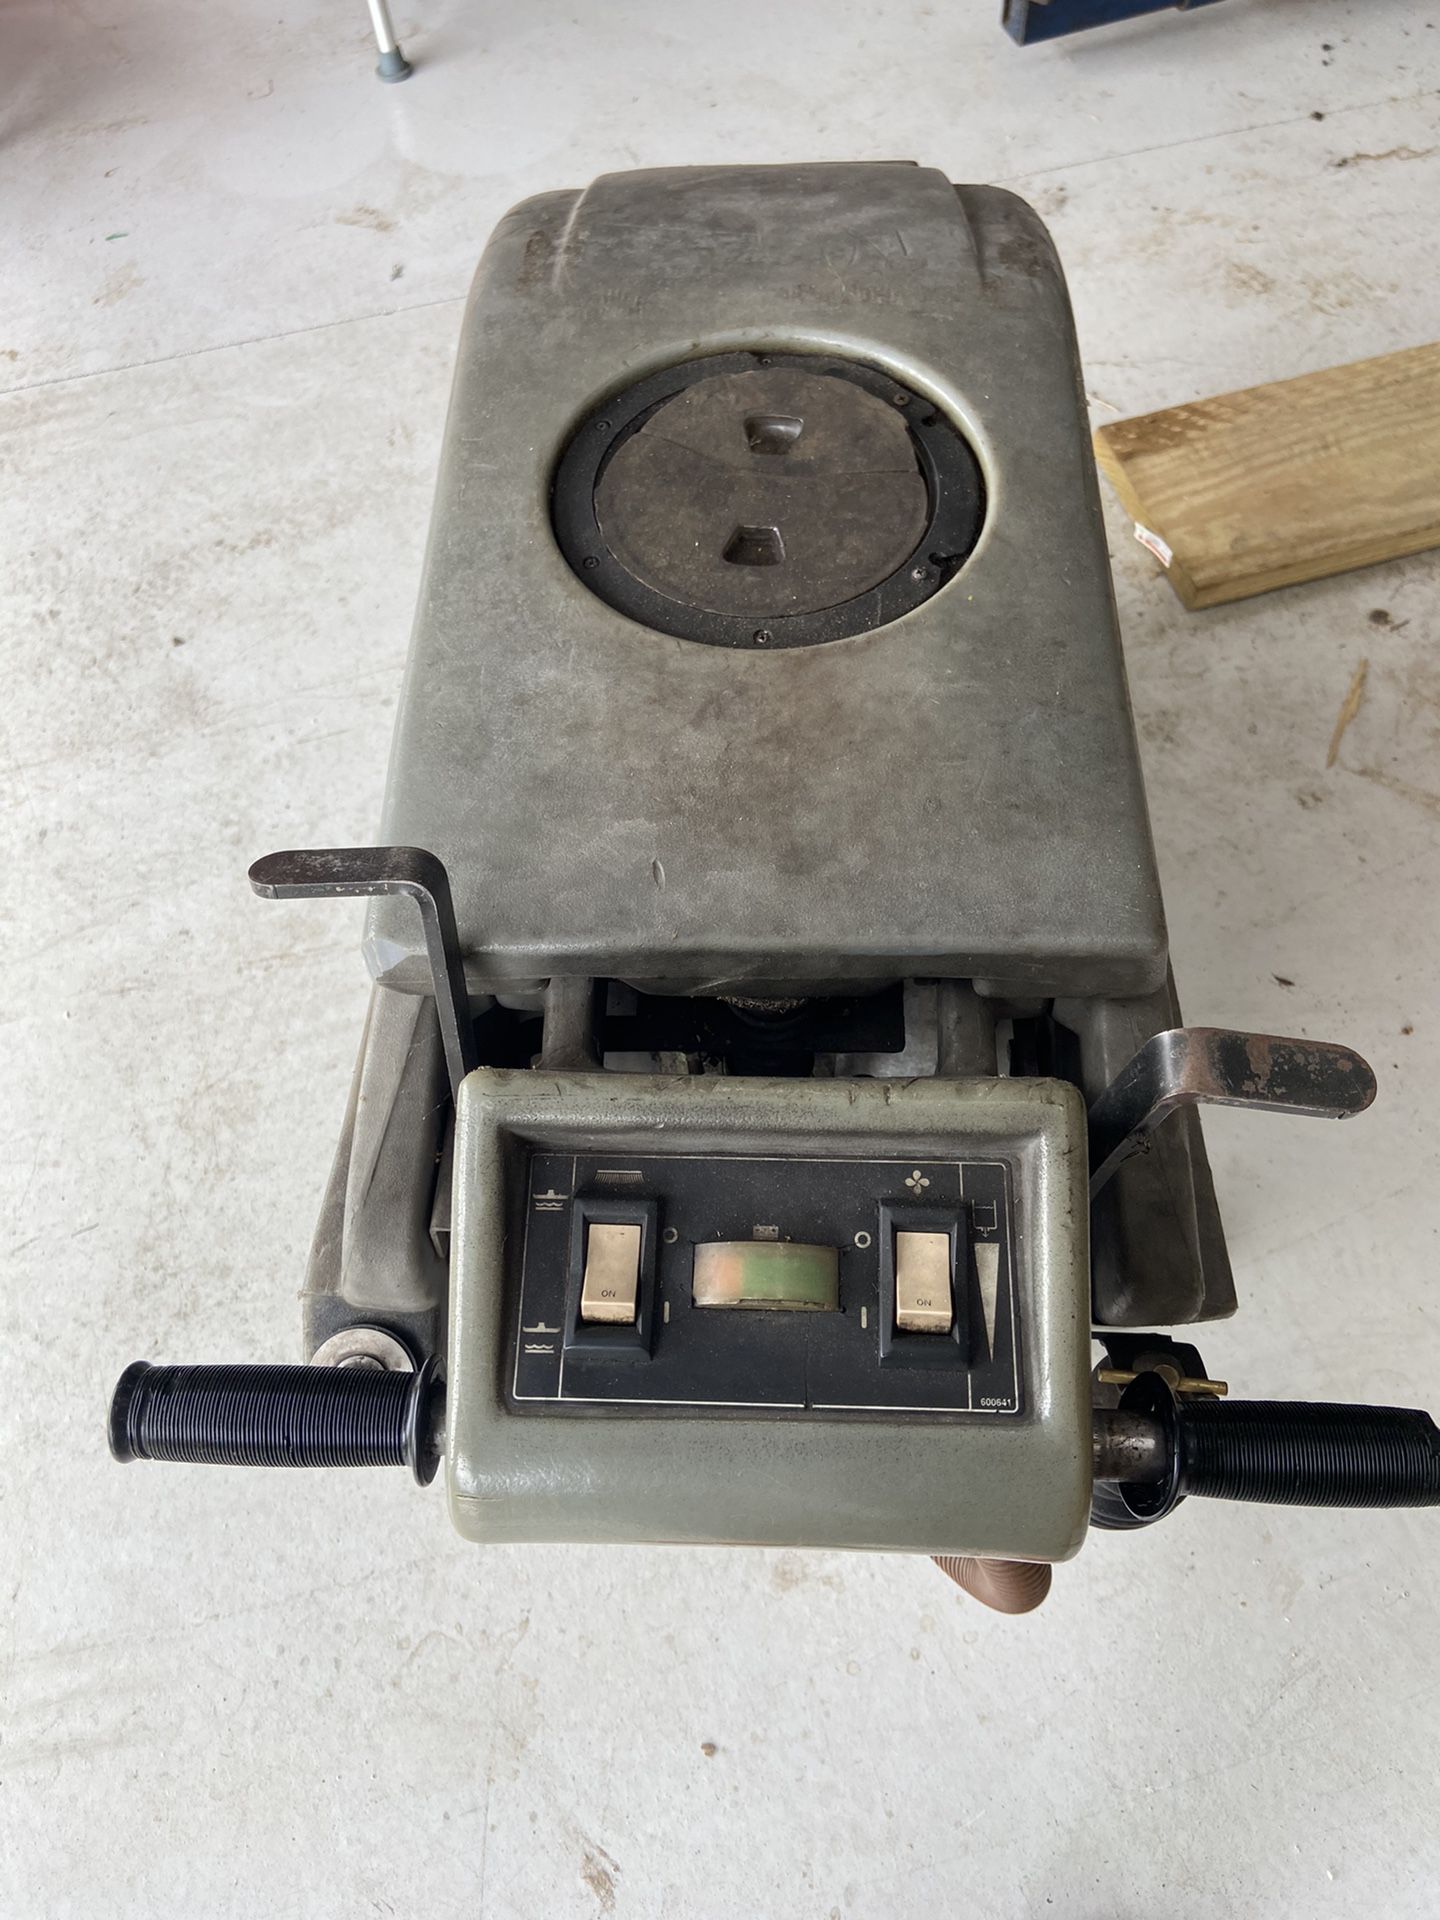 Nobles Floor cleaner scrubber machine... Needs work or for parts